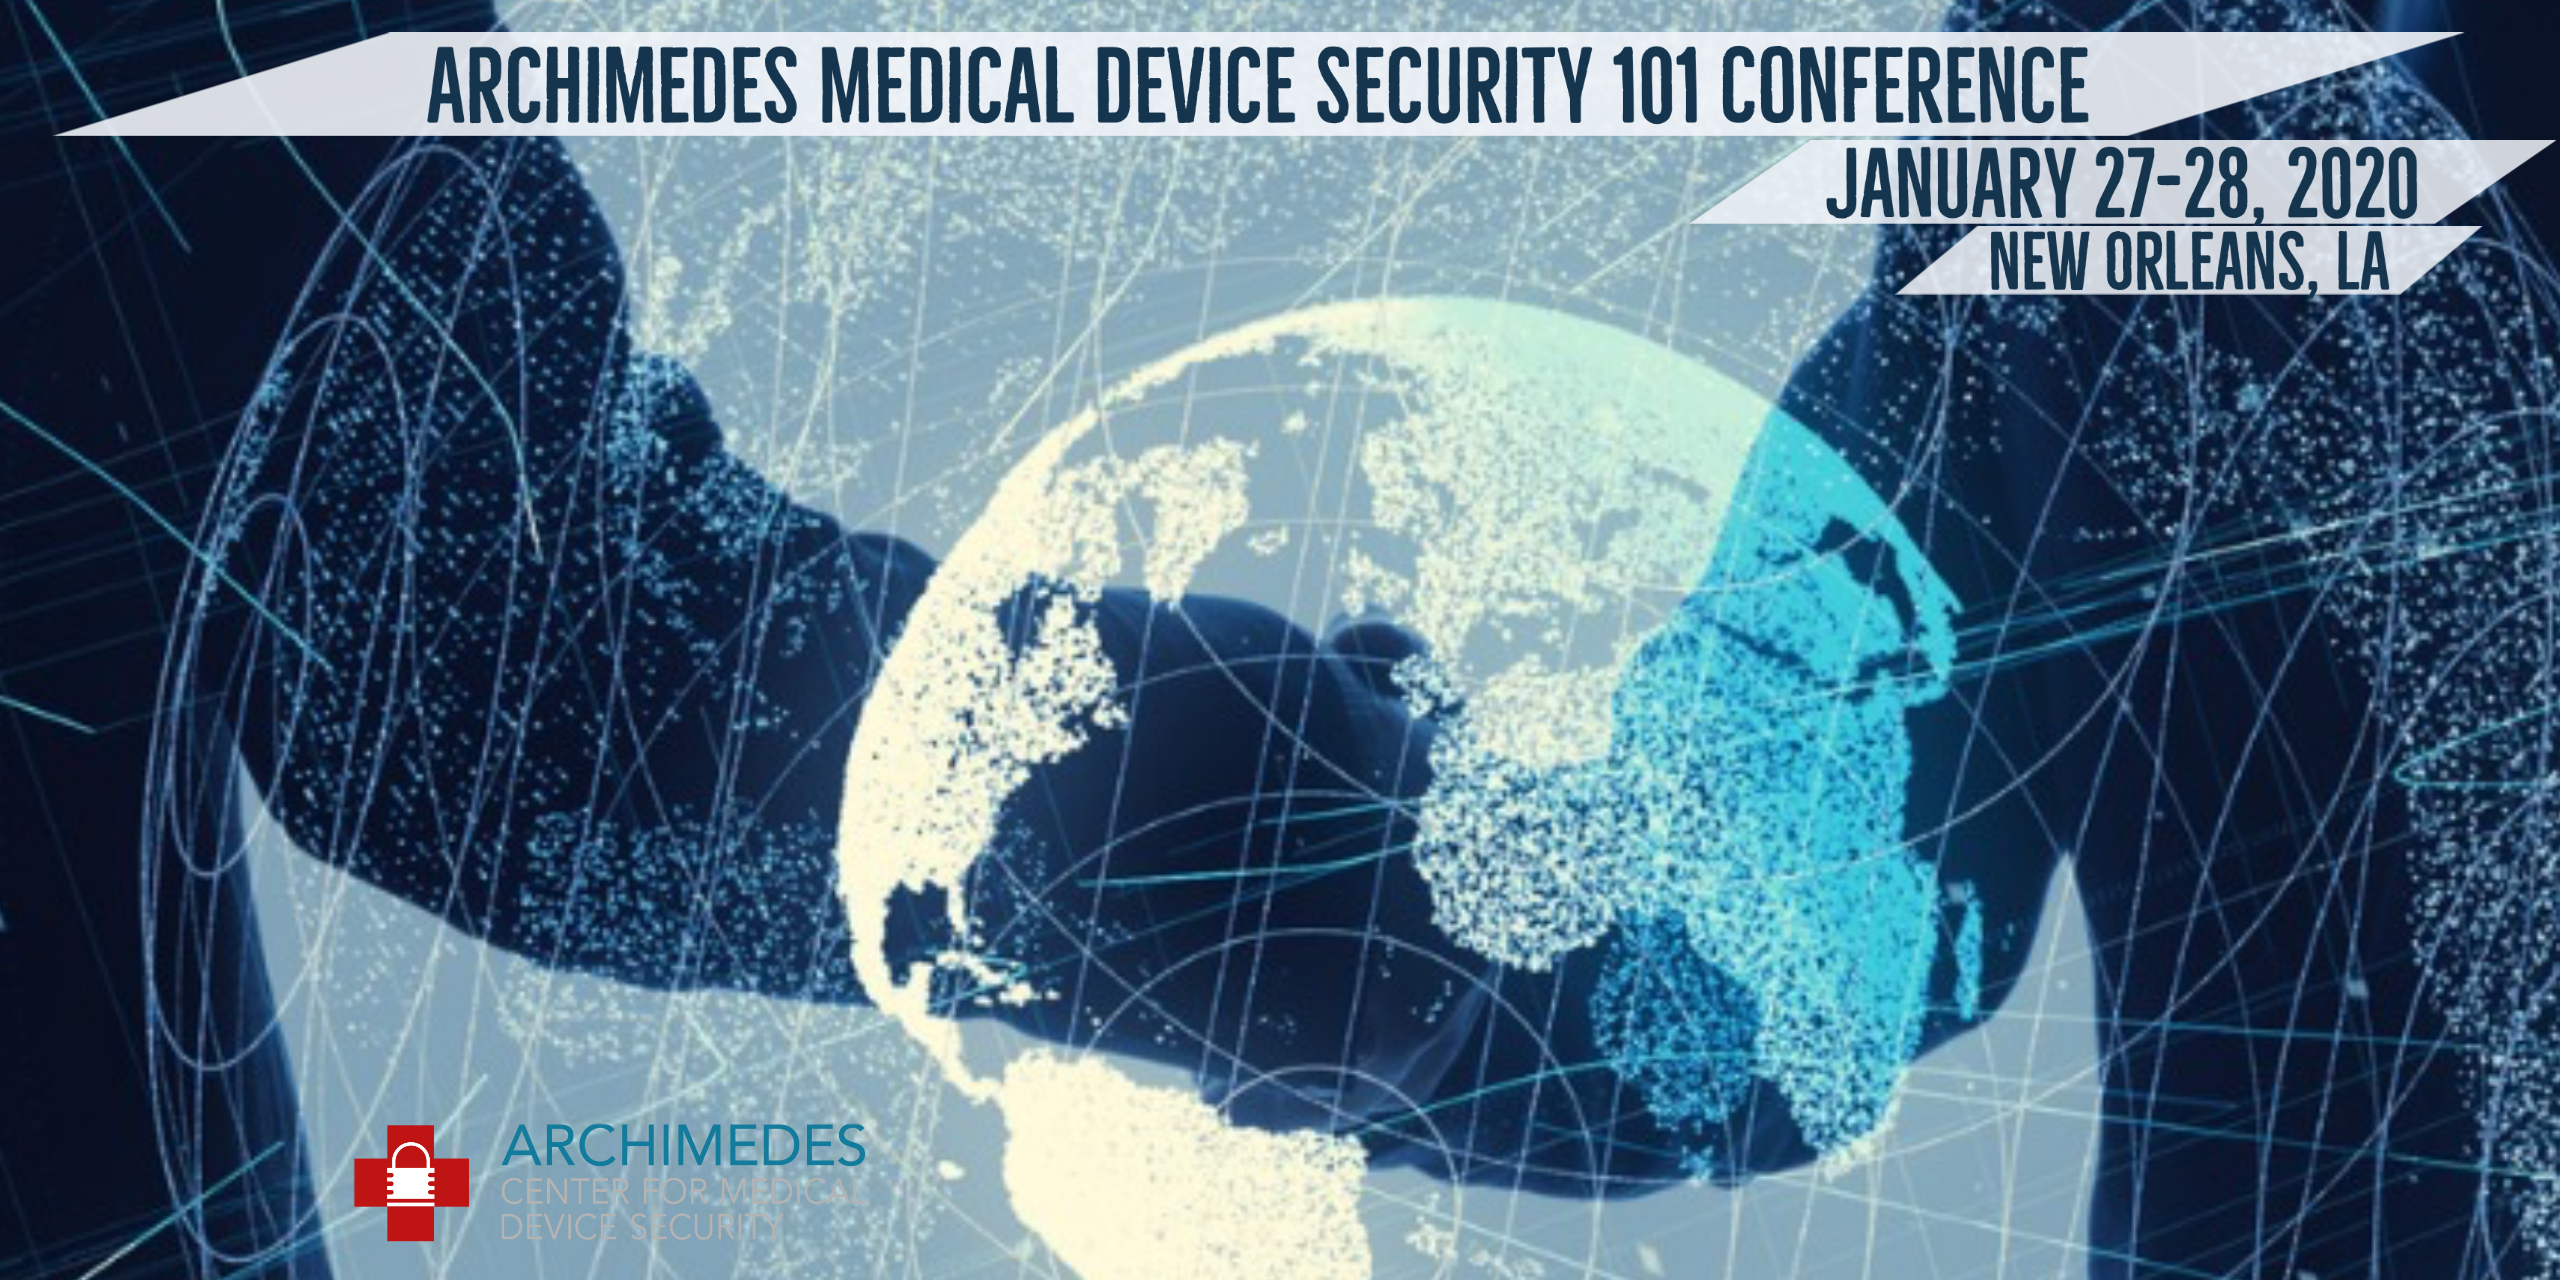 2020 Medical Device Security 101 Conference Highlights